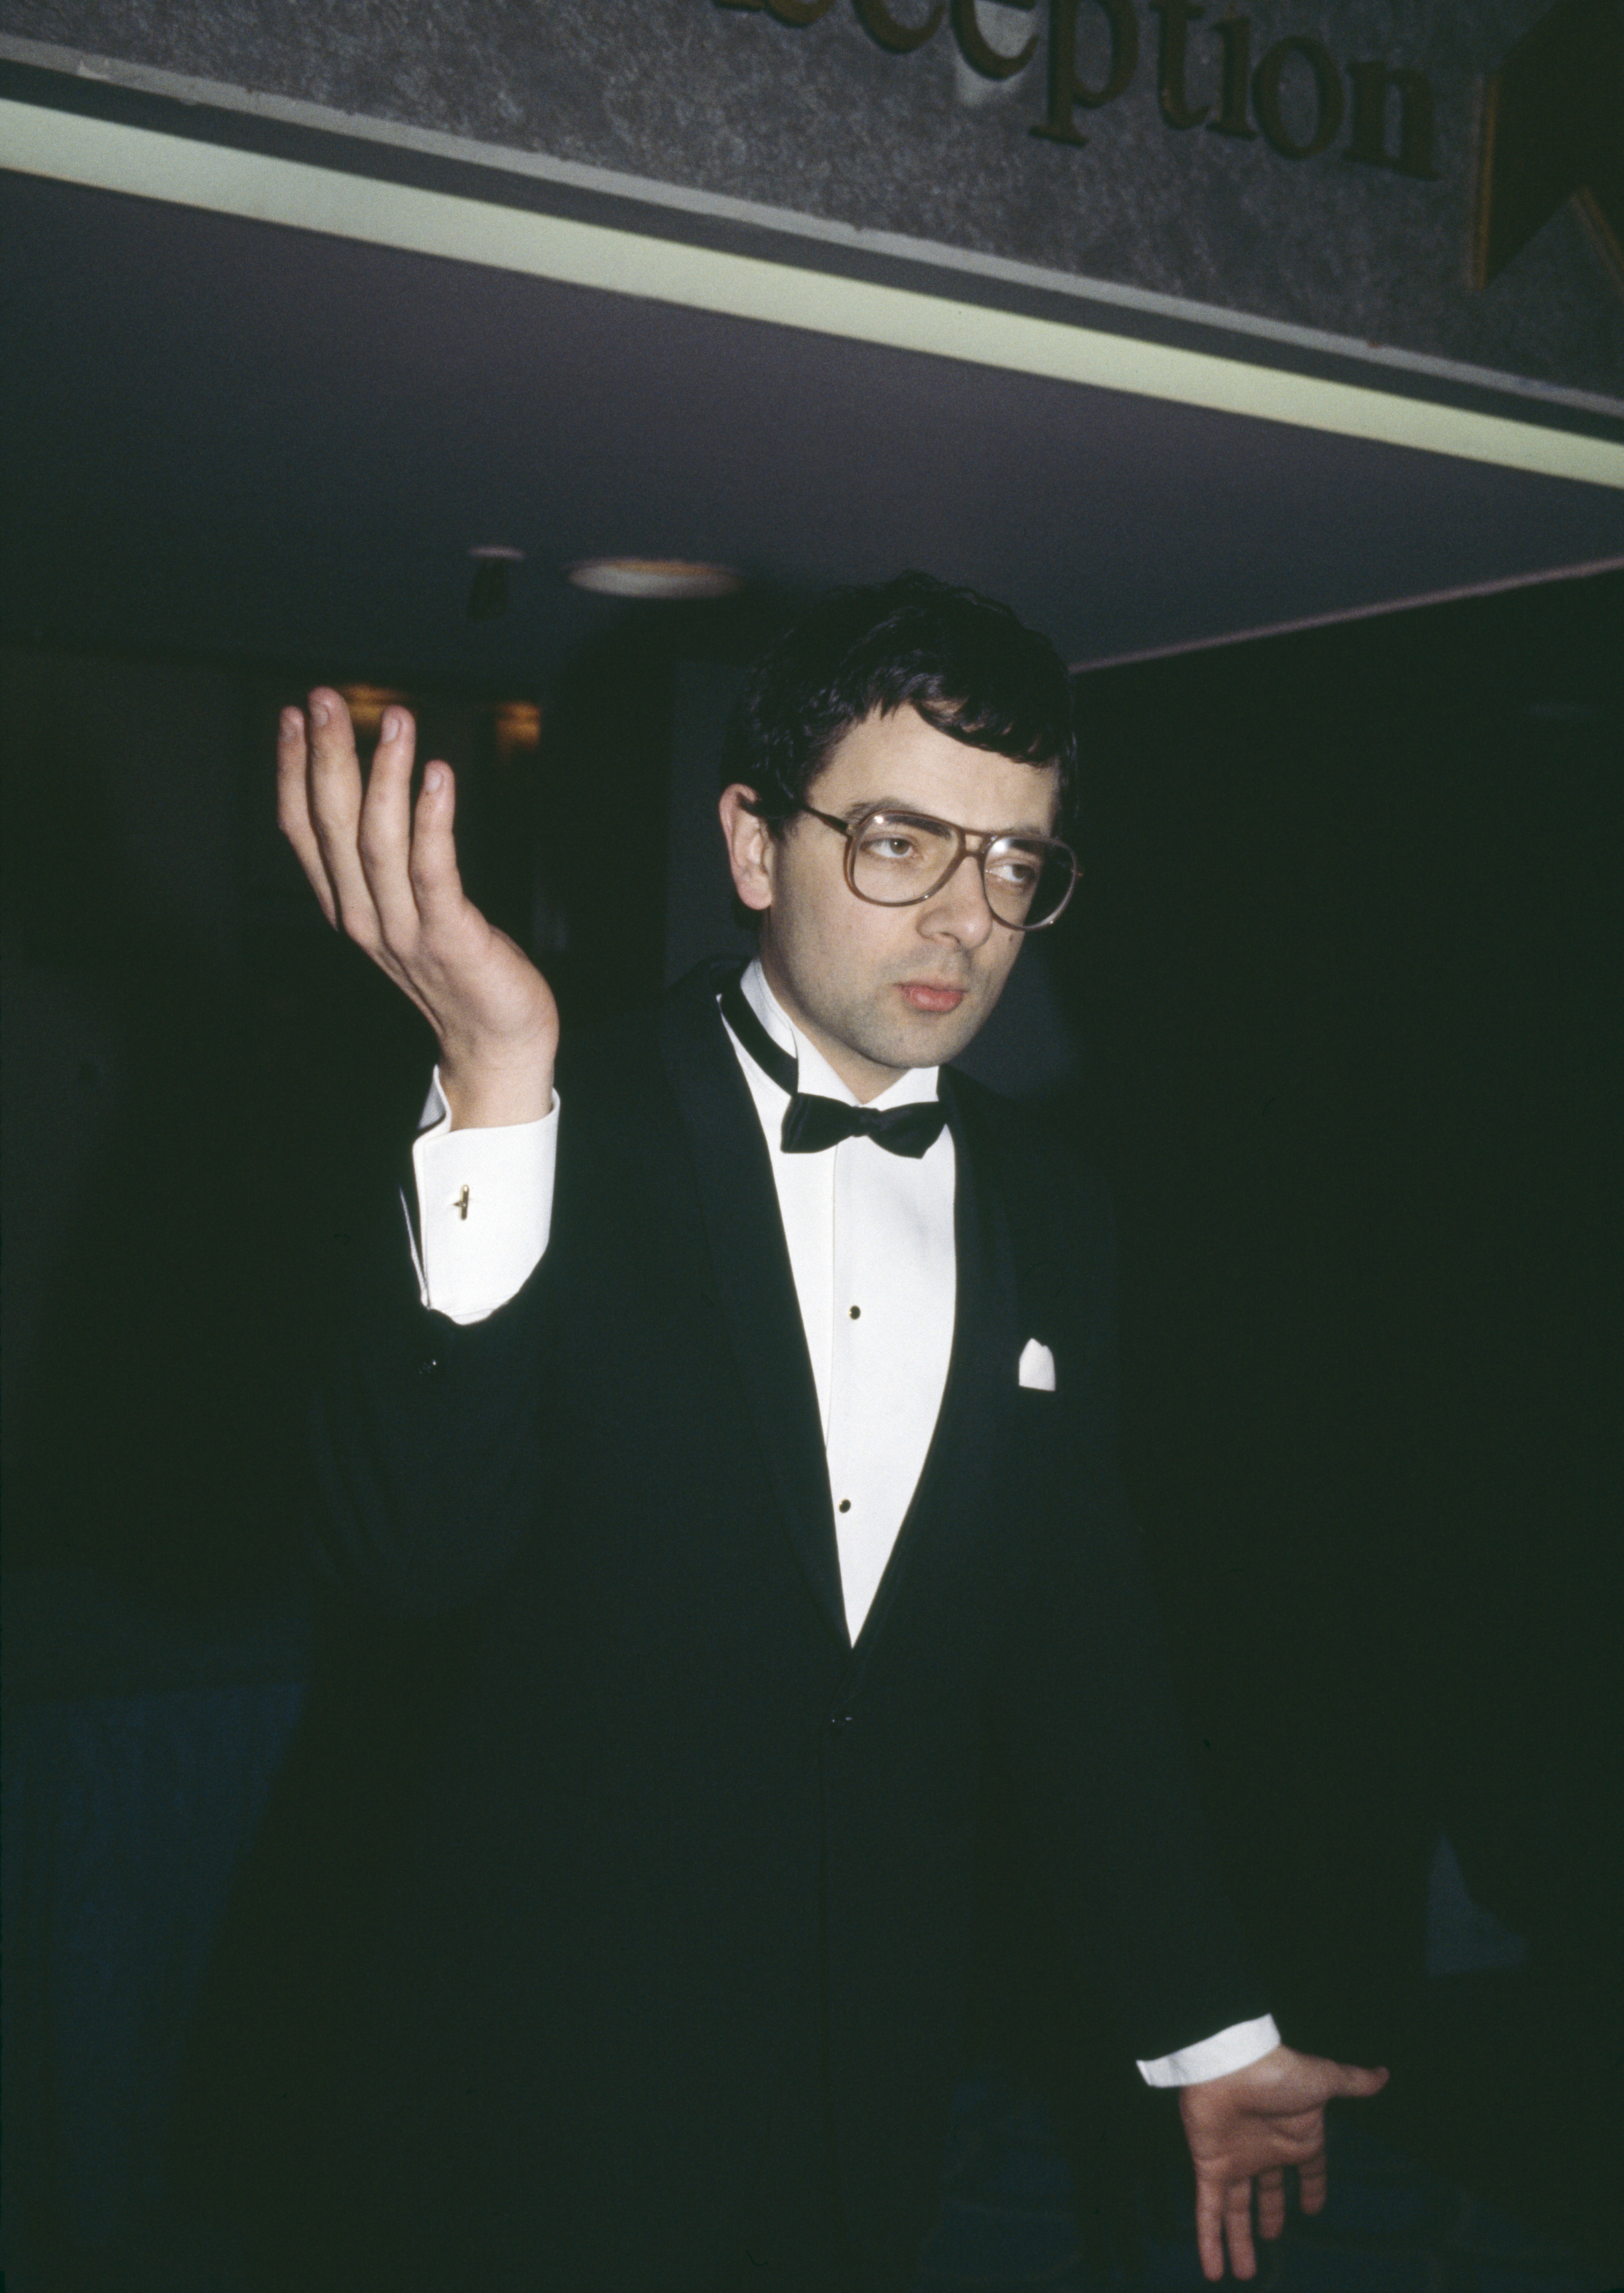 Rowan Atkinson attends the BAFTA awards in London, on 5 March, 1985 | Source: Getty Images